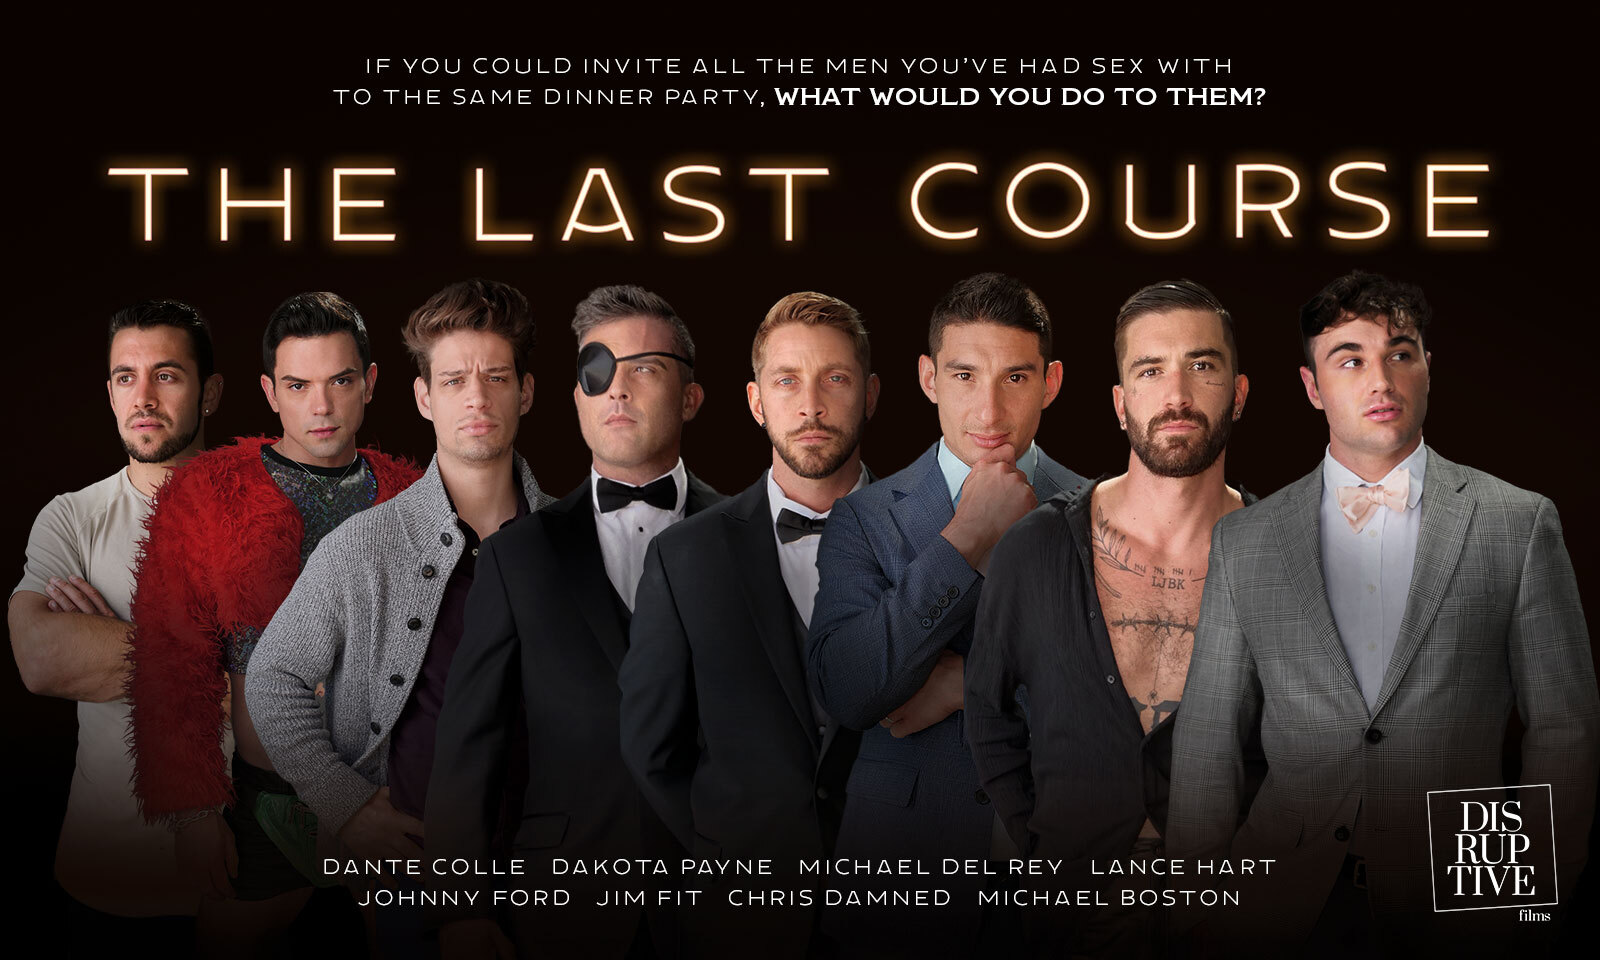 DISRUPTIVE FILMS WRAPS PRODUCTION OF FIRST FEATURE FILM , “THE LAST COURSE”